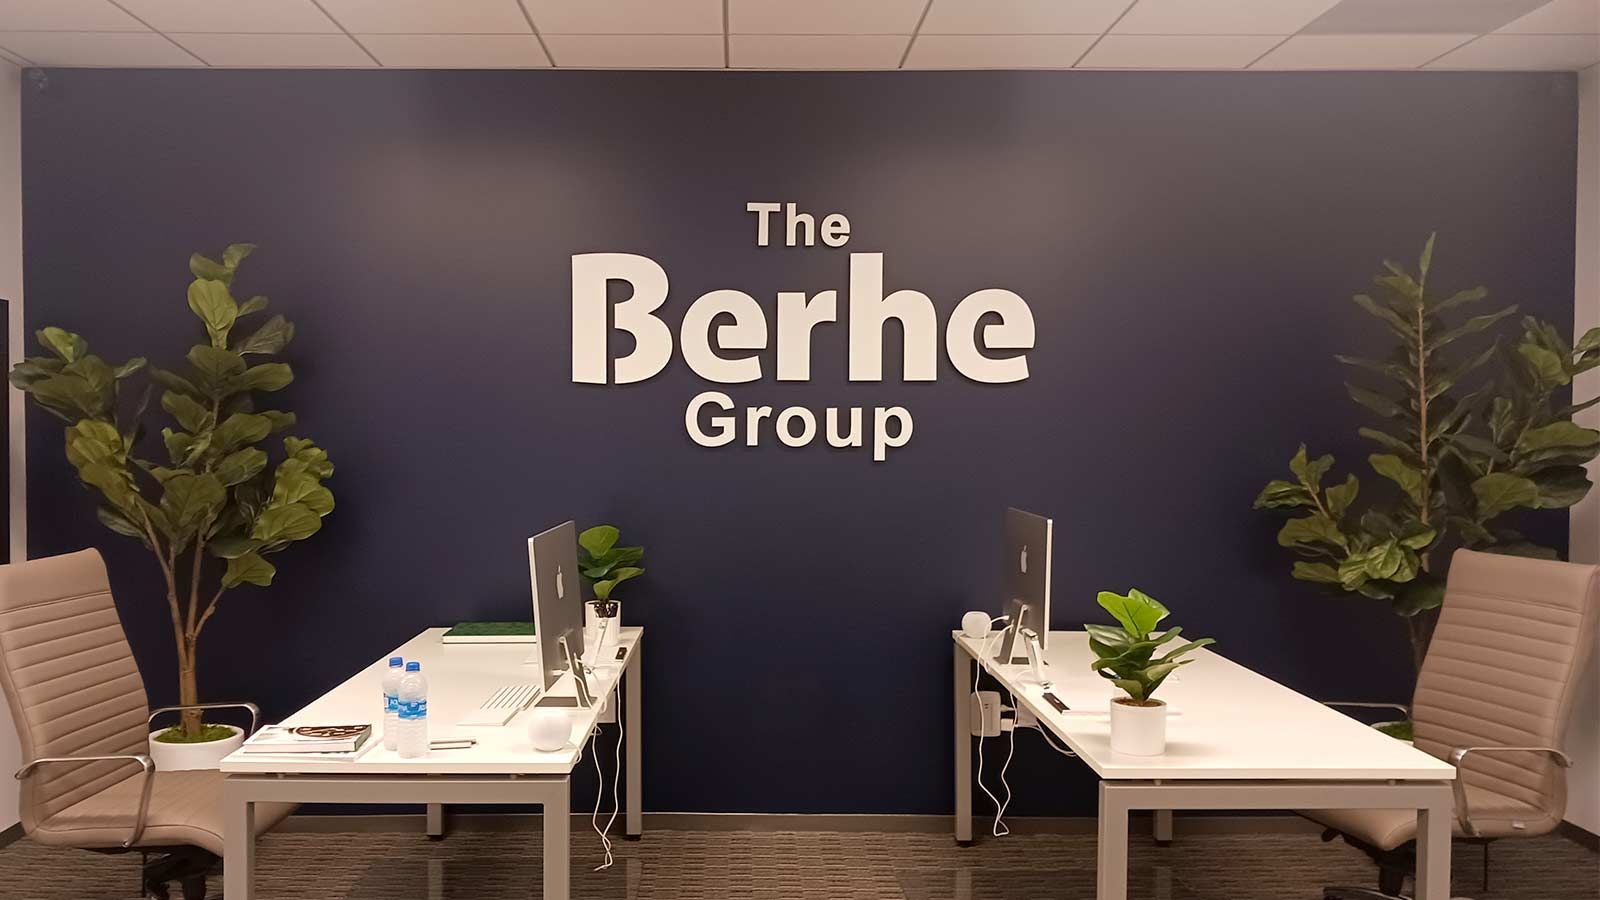 The Berhe Group 3D sign attached to the wall